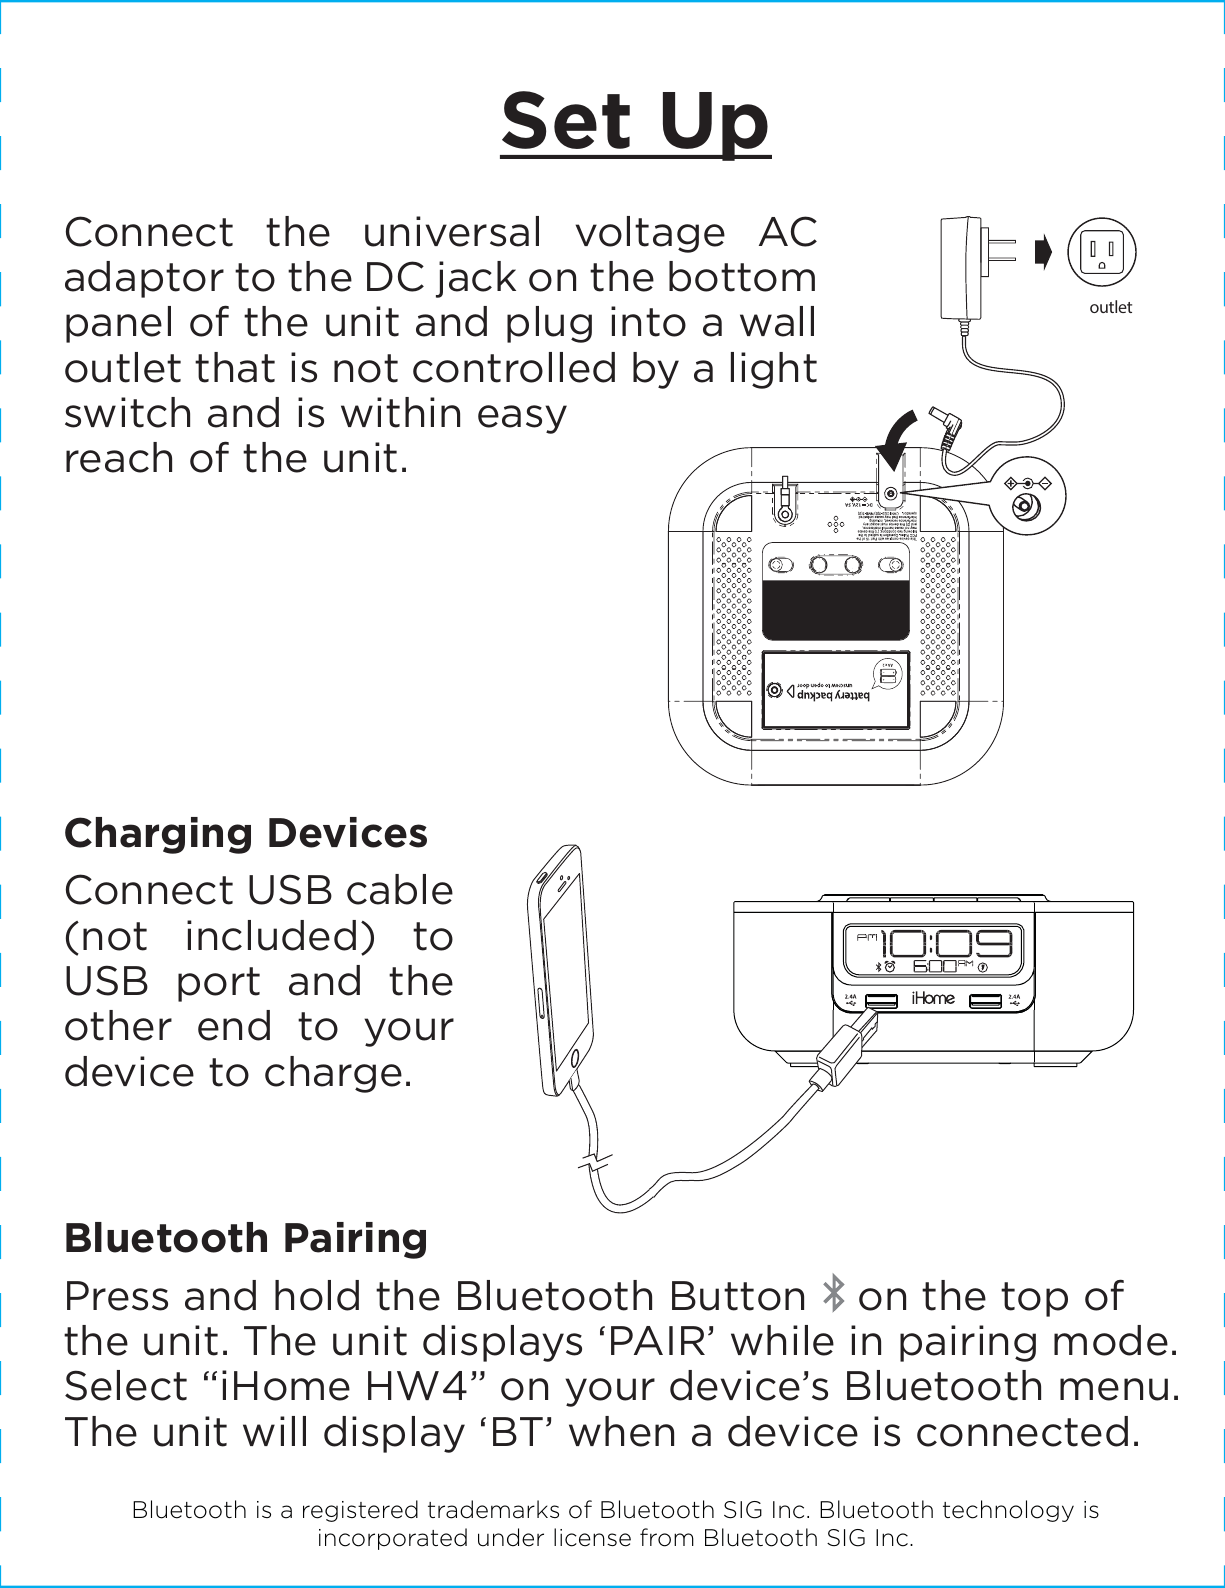 Set UpConnect the universal voltage AC adaptor to the DC jack on the bottom panel of the unit and plug into a wall outlet that is not controlled by a light switch and is within easy reach of the unit. outletCharging DevicesConnect USB cable (not included) to USB port and the other end to your device to charge.Bluetooth PairingPress and hold the Bluetooth Button    on the top of the unit. The unit displays ‘PAIR’ while in pairing mode. Select “iHome HW4” on your device’s Bluetooth menu. The unit will display ‘BT’ when a device is connected.Bluetooth is a registered trademarks of Bluetooth SIG Inc. Bluetooth technology is incorporated under license from Bluetooth SIG Inc.